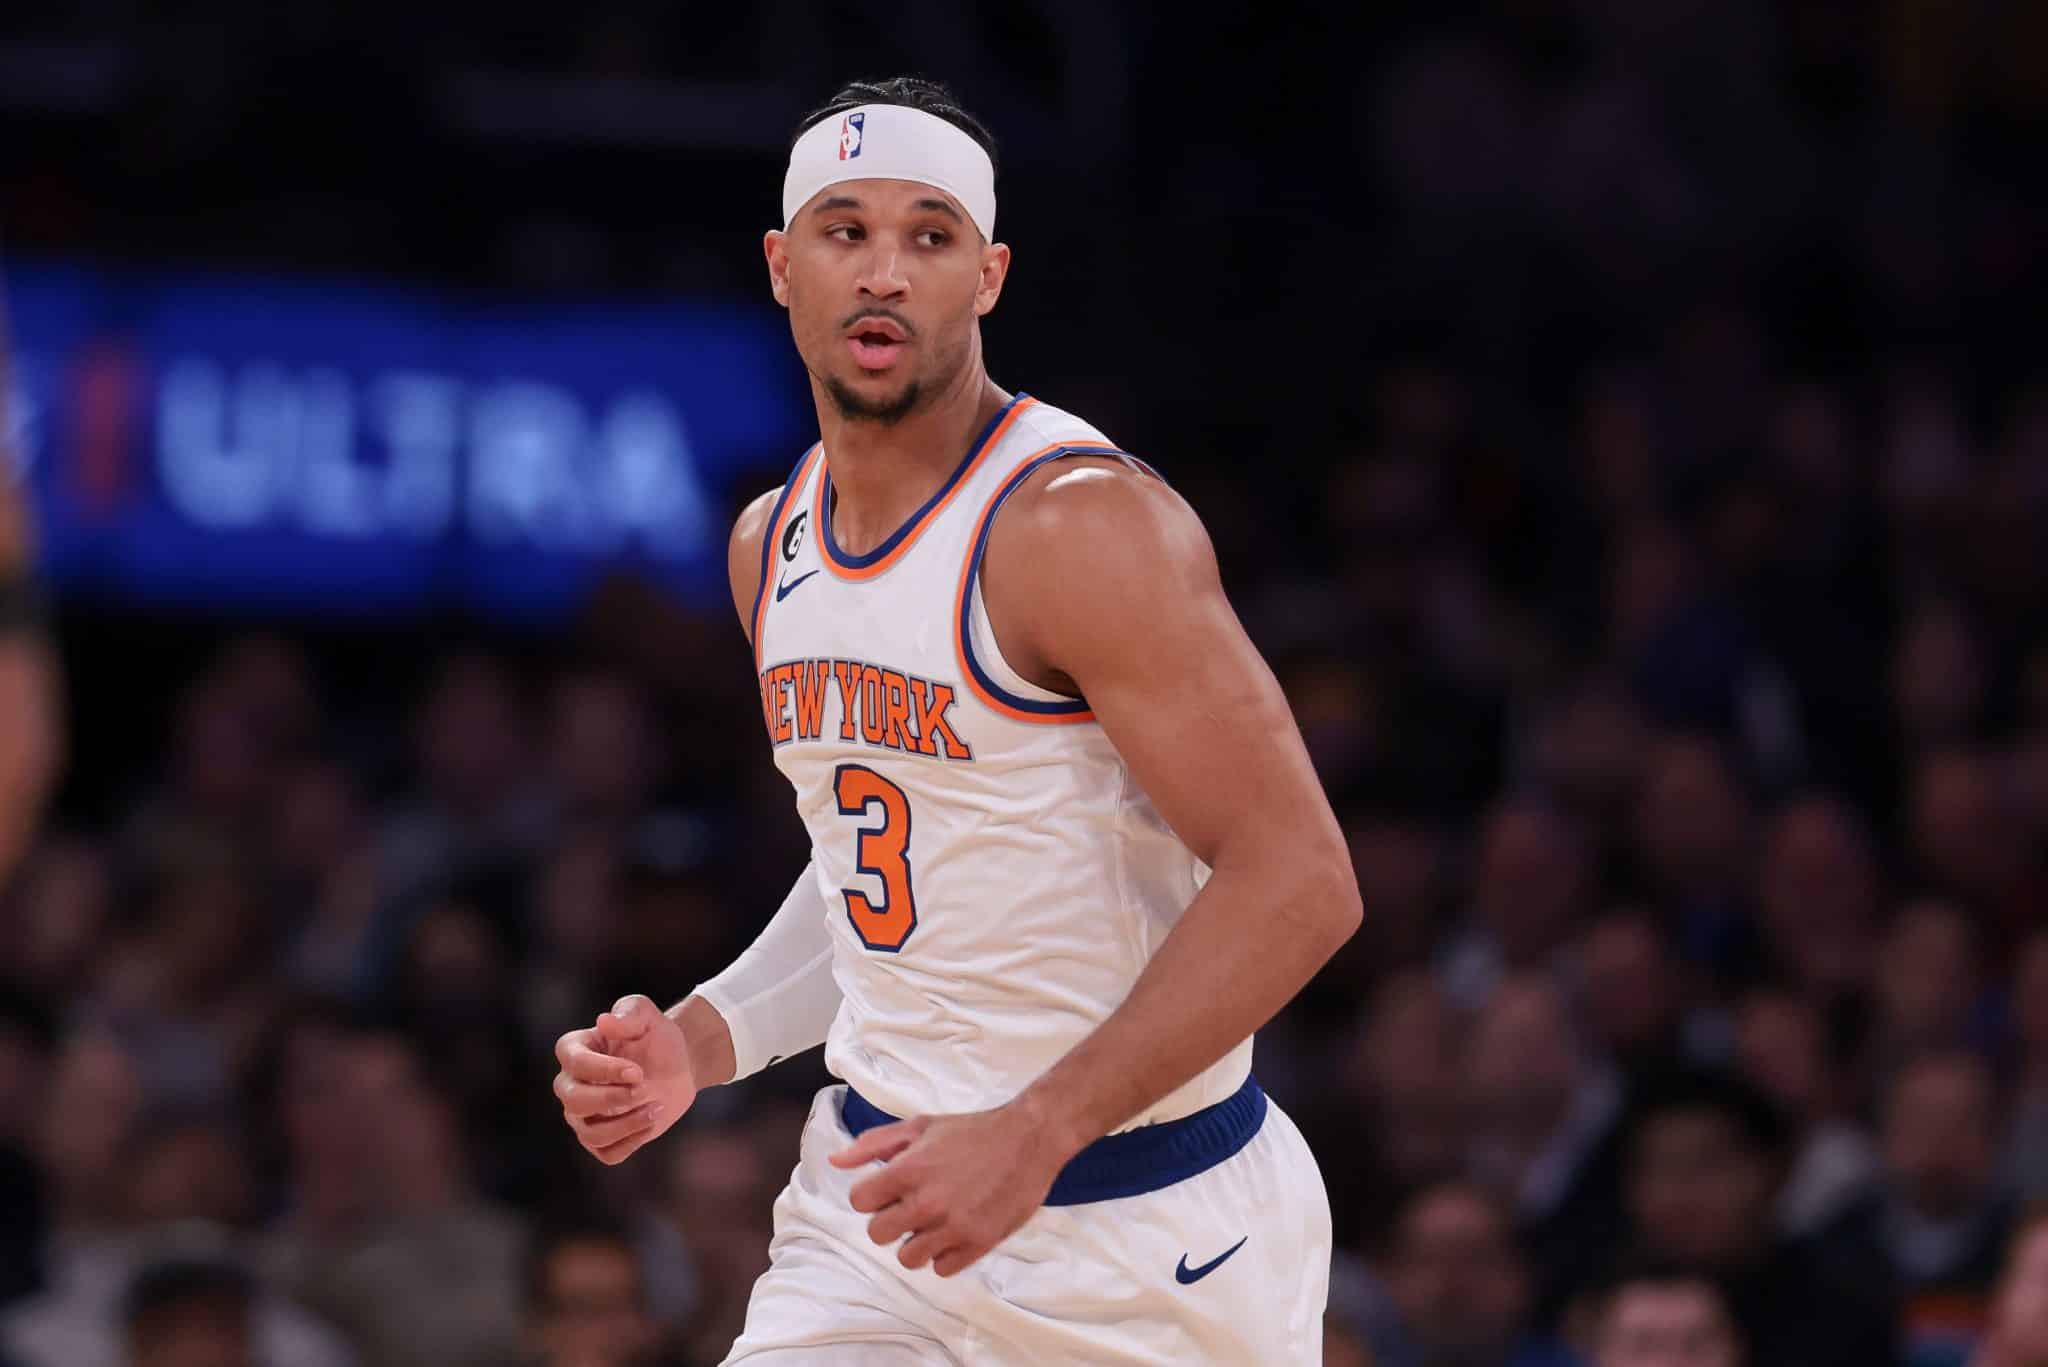 New York Knicks targeting US$30m per year for new jersey patch